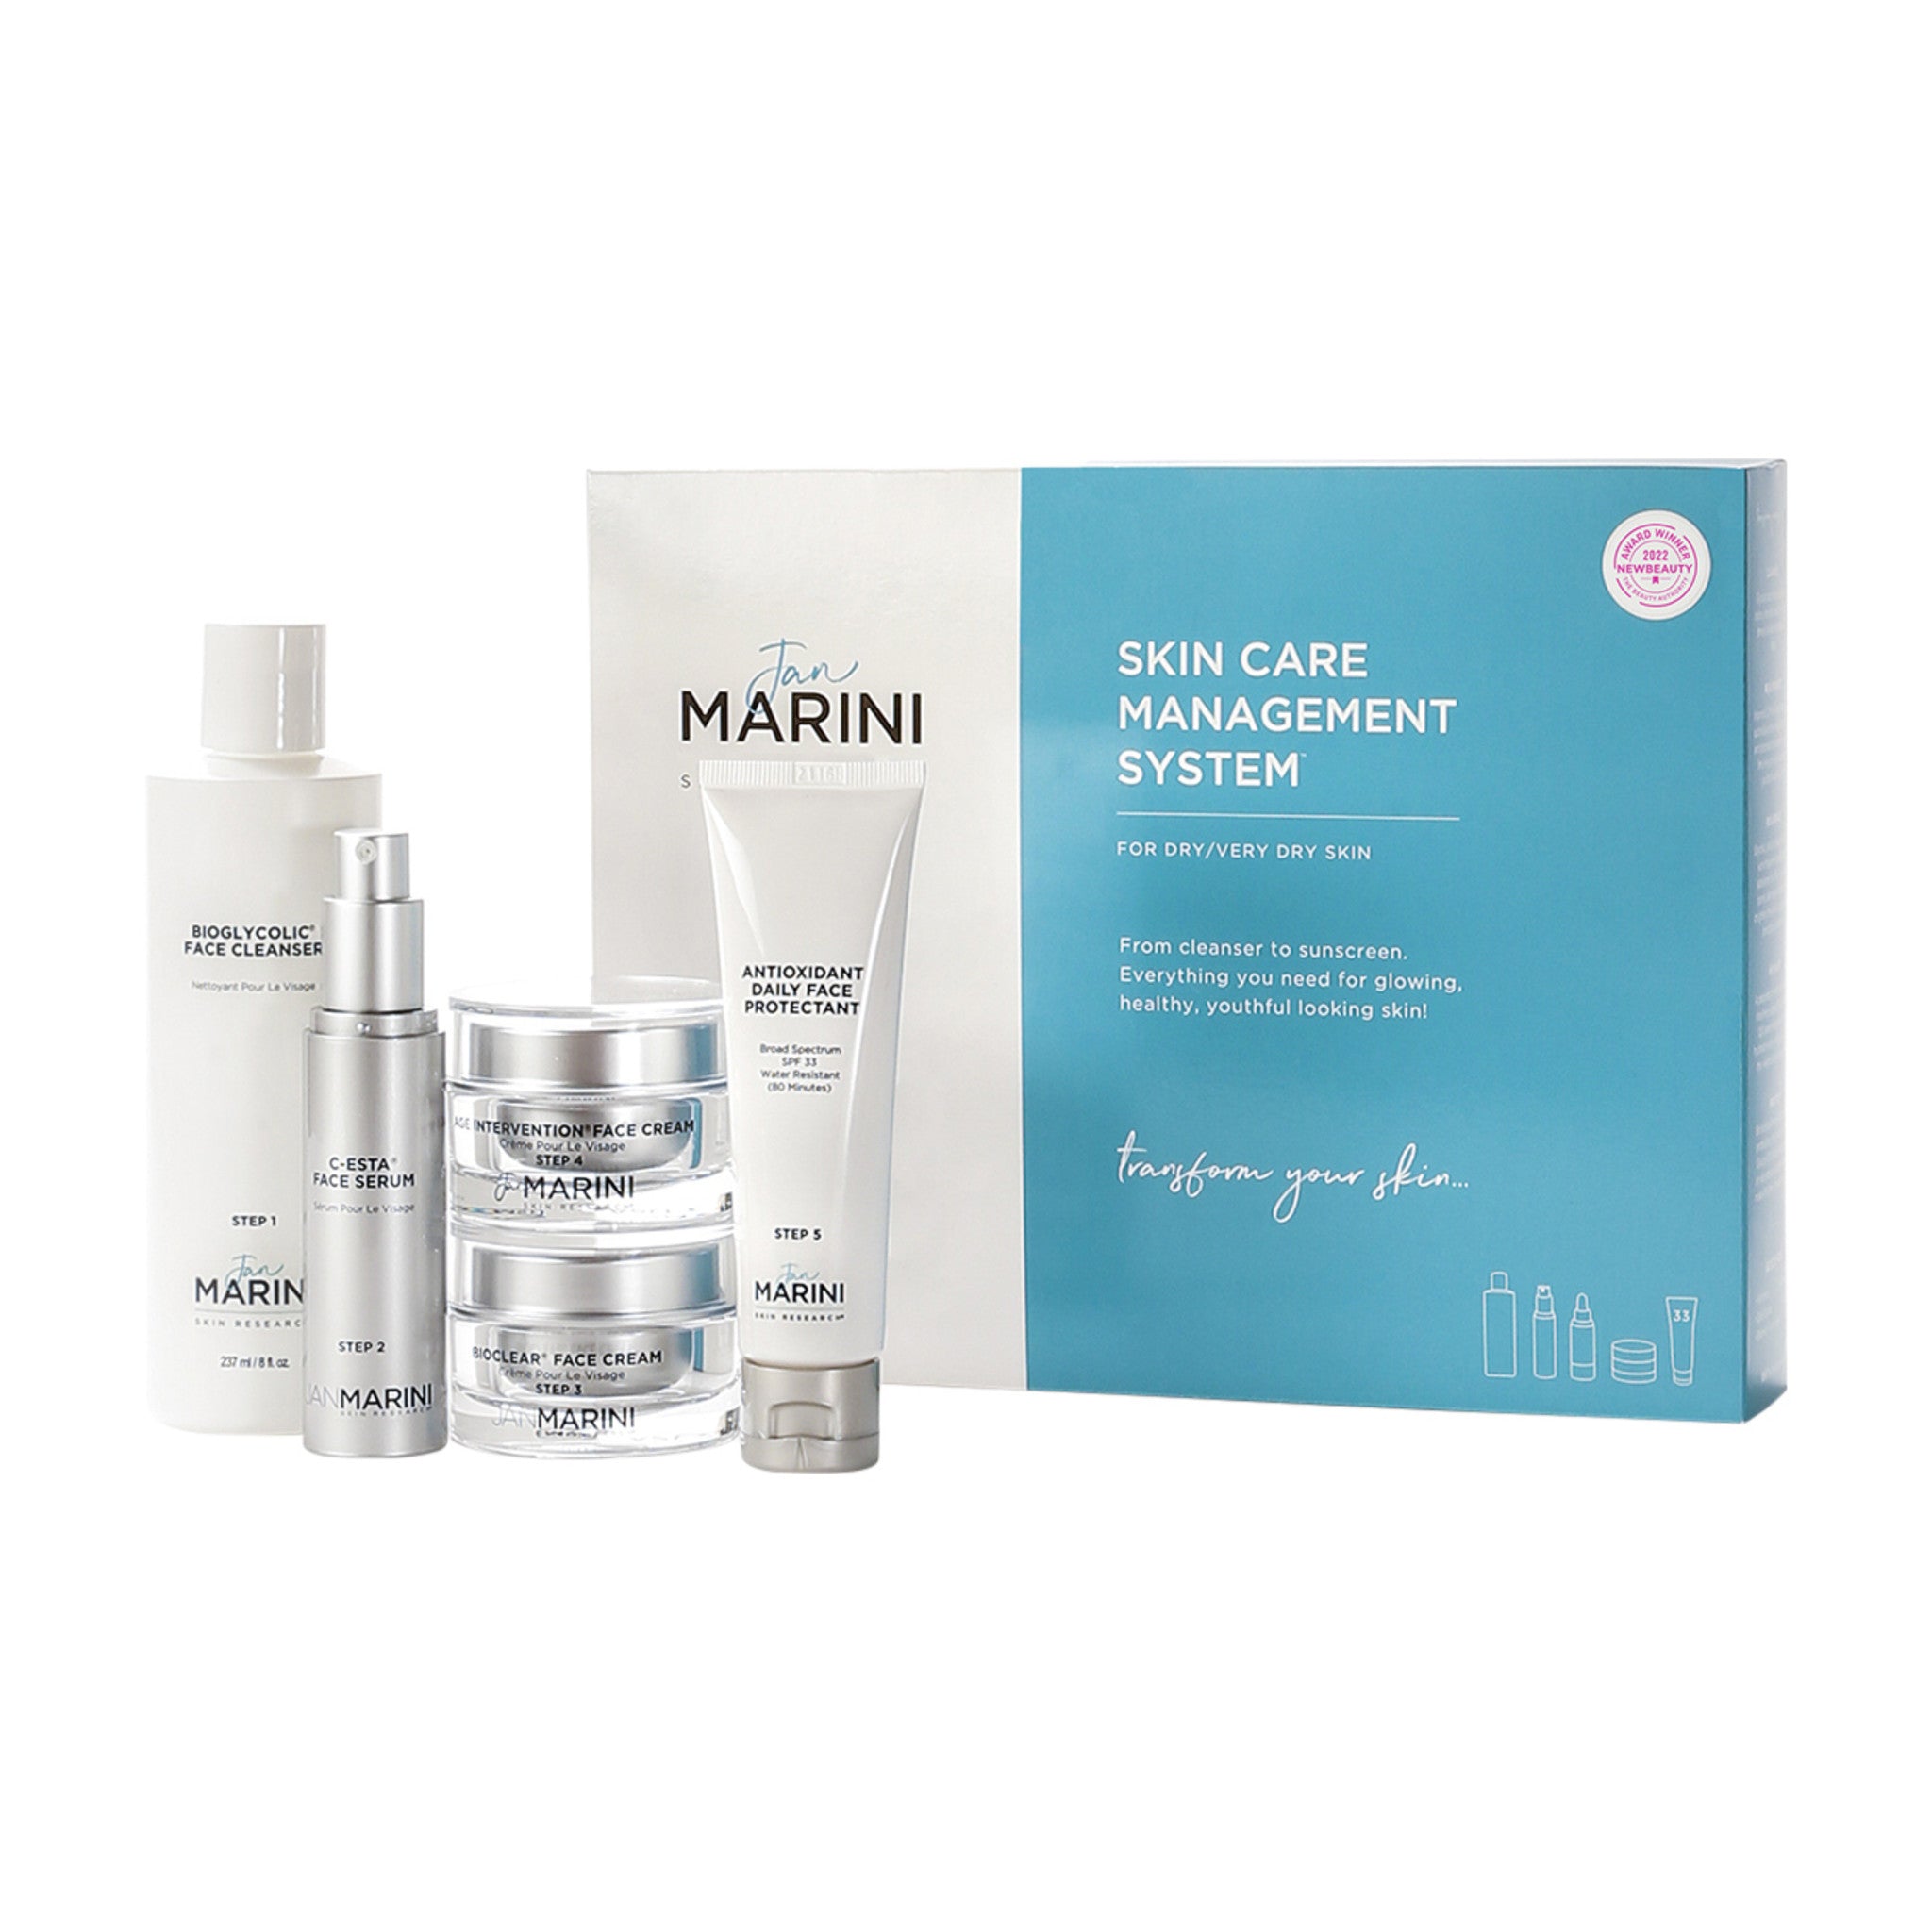 Jan Marini Skin Care Management System Dry or Very Dry with Antioxidant Daily Face Protectant SPF 33 Size variant: main image.